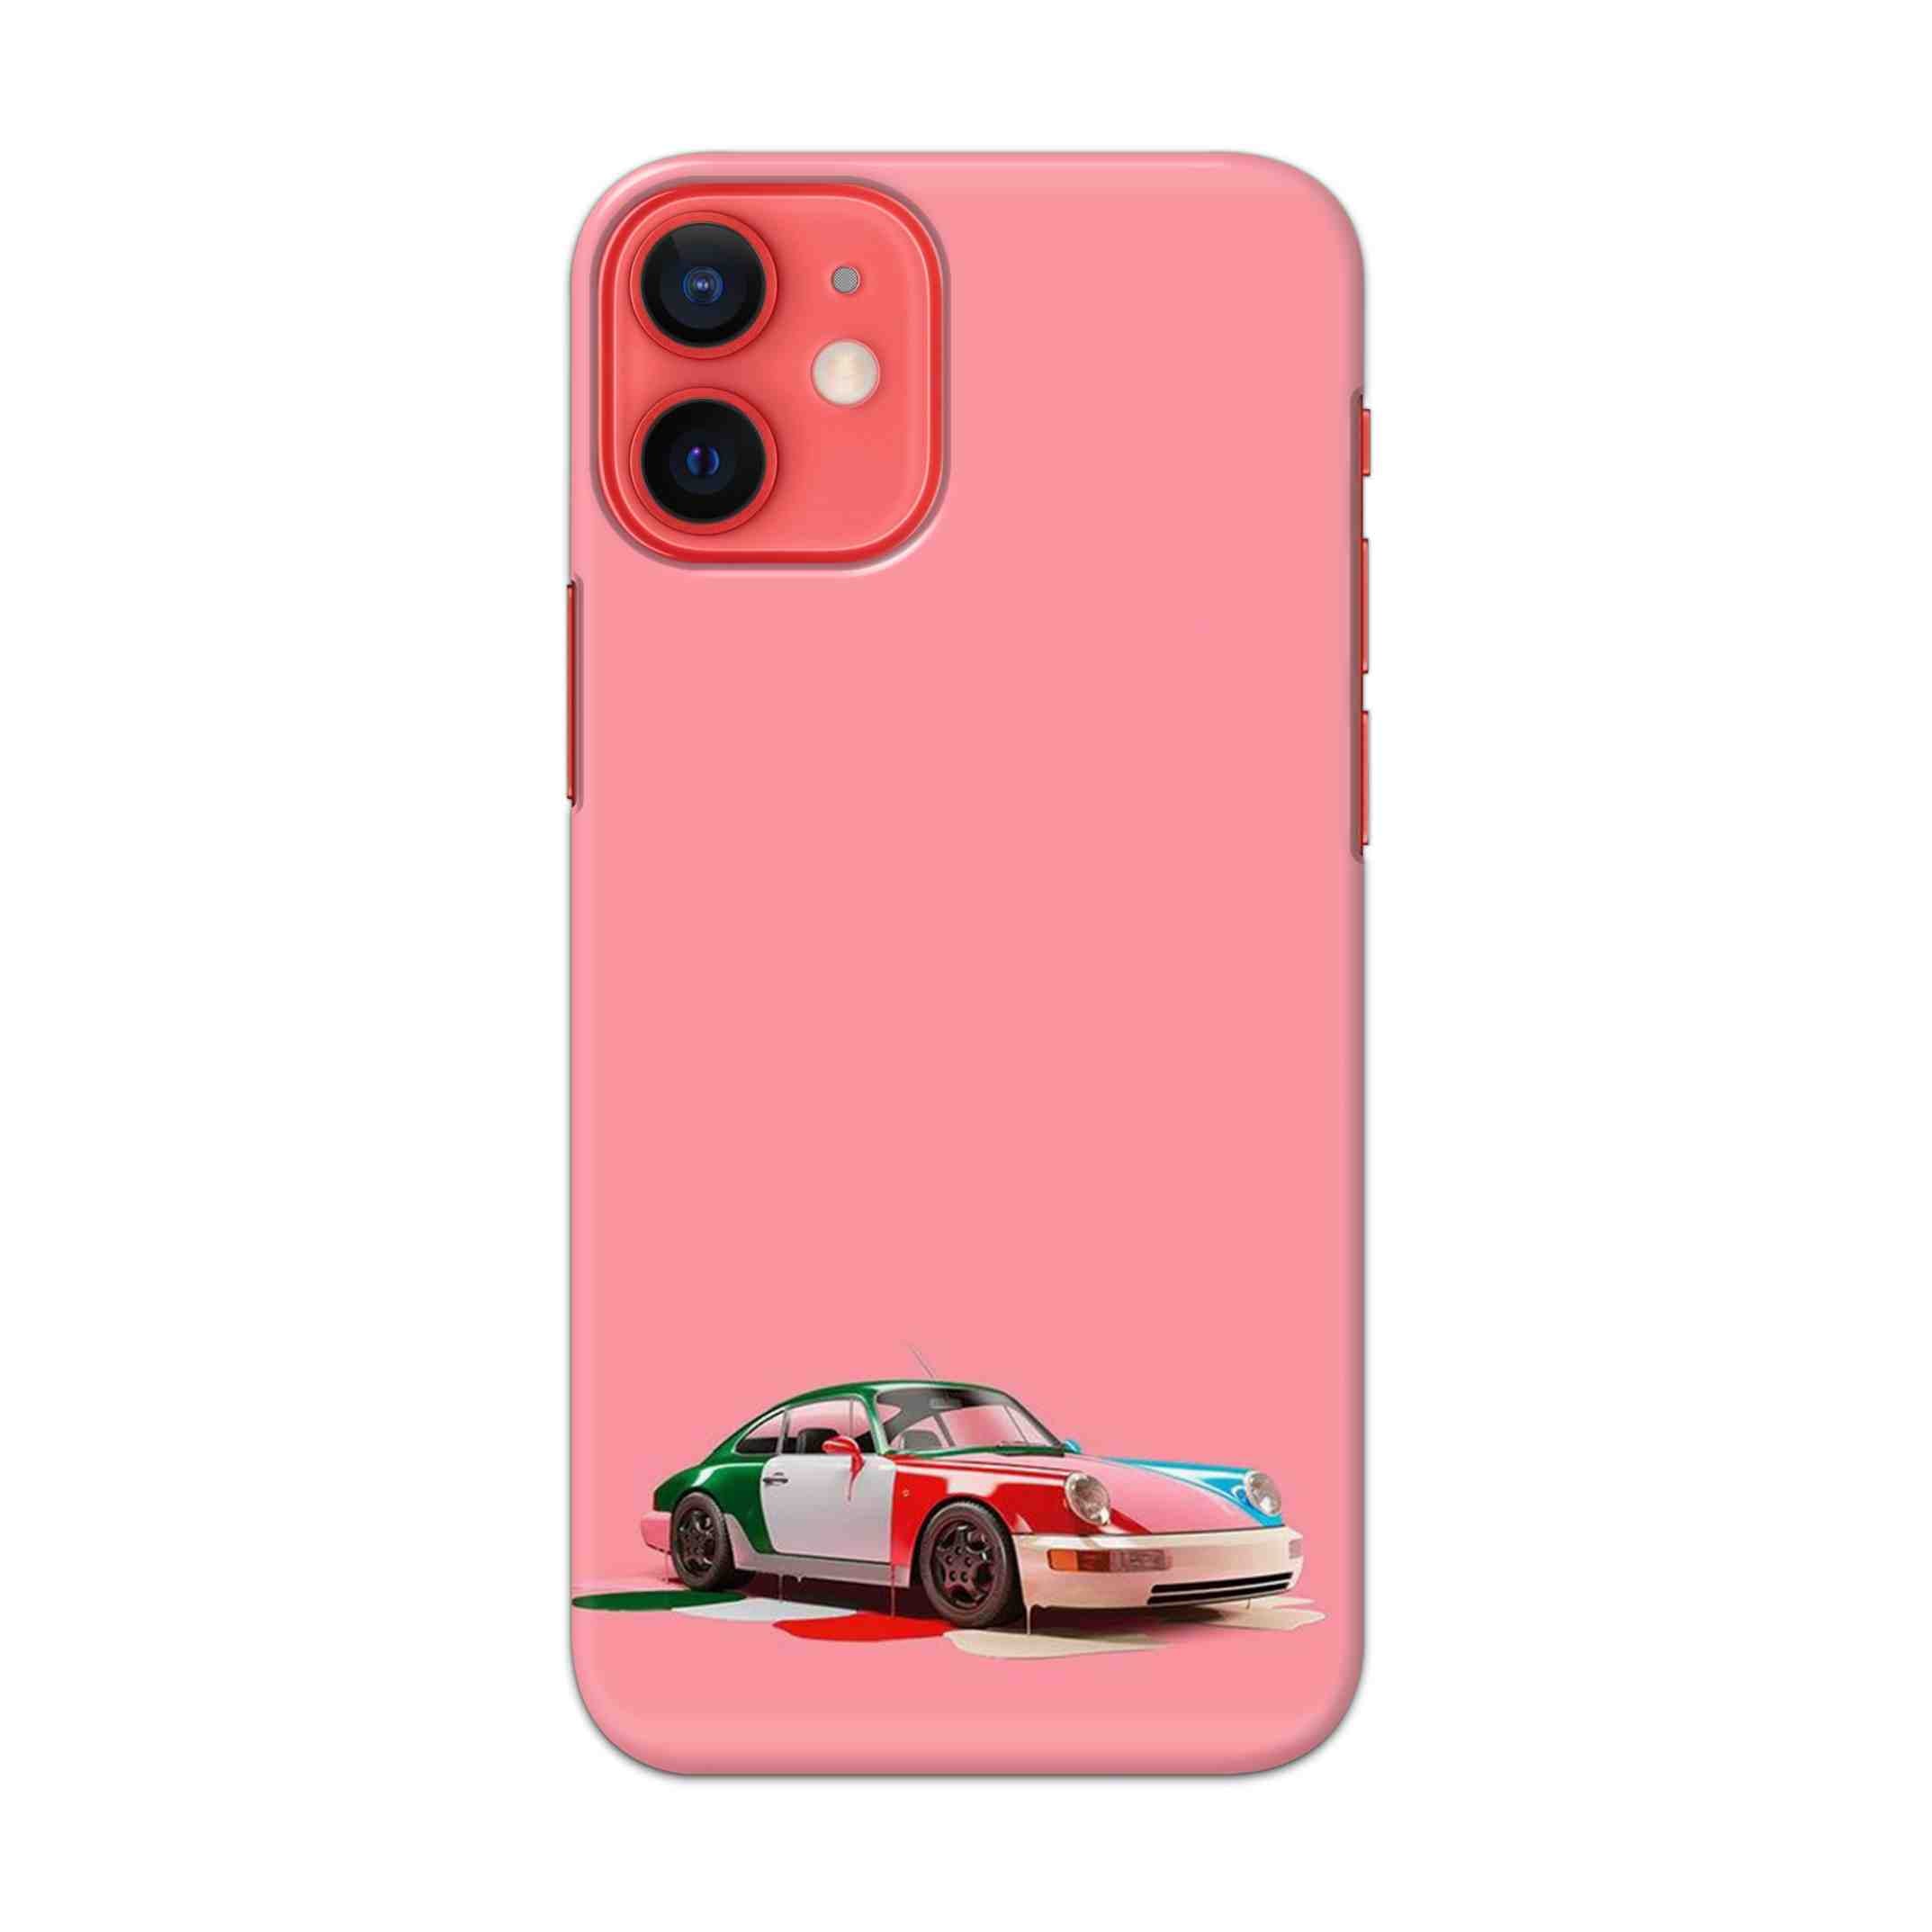 Buy Pink Porche Hard Back Mobile Phone Case/Cover For Apple iPhone 12 mini Online